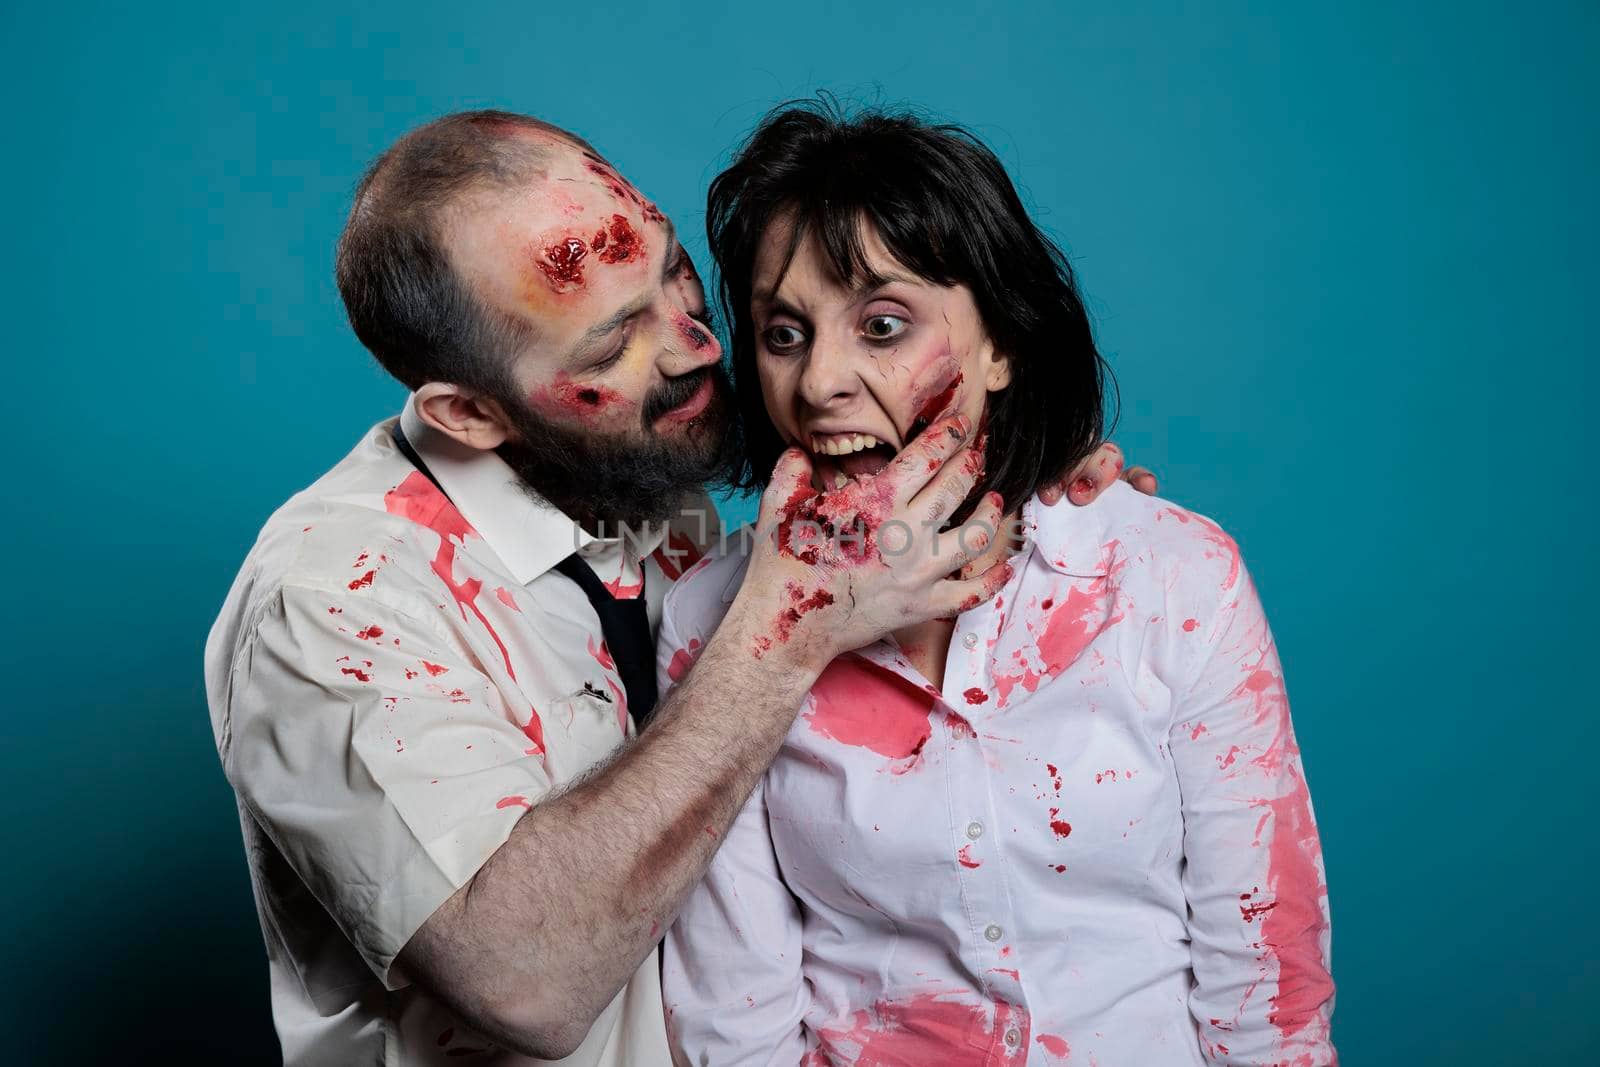 Undead zombies biting hand on camera, acting aggressive and dangerous in studio. Crazy evil monsters showing teeth and having bloody wounds, looking creepy and deadly with scars and scratches.